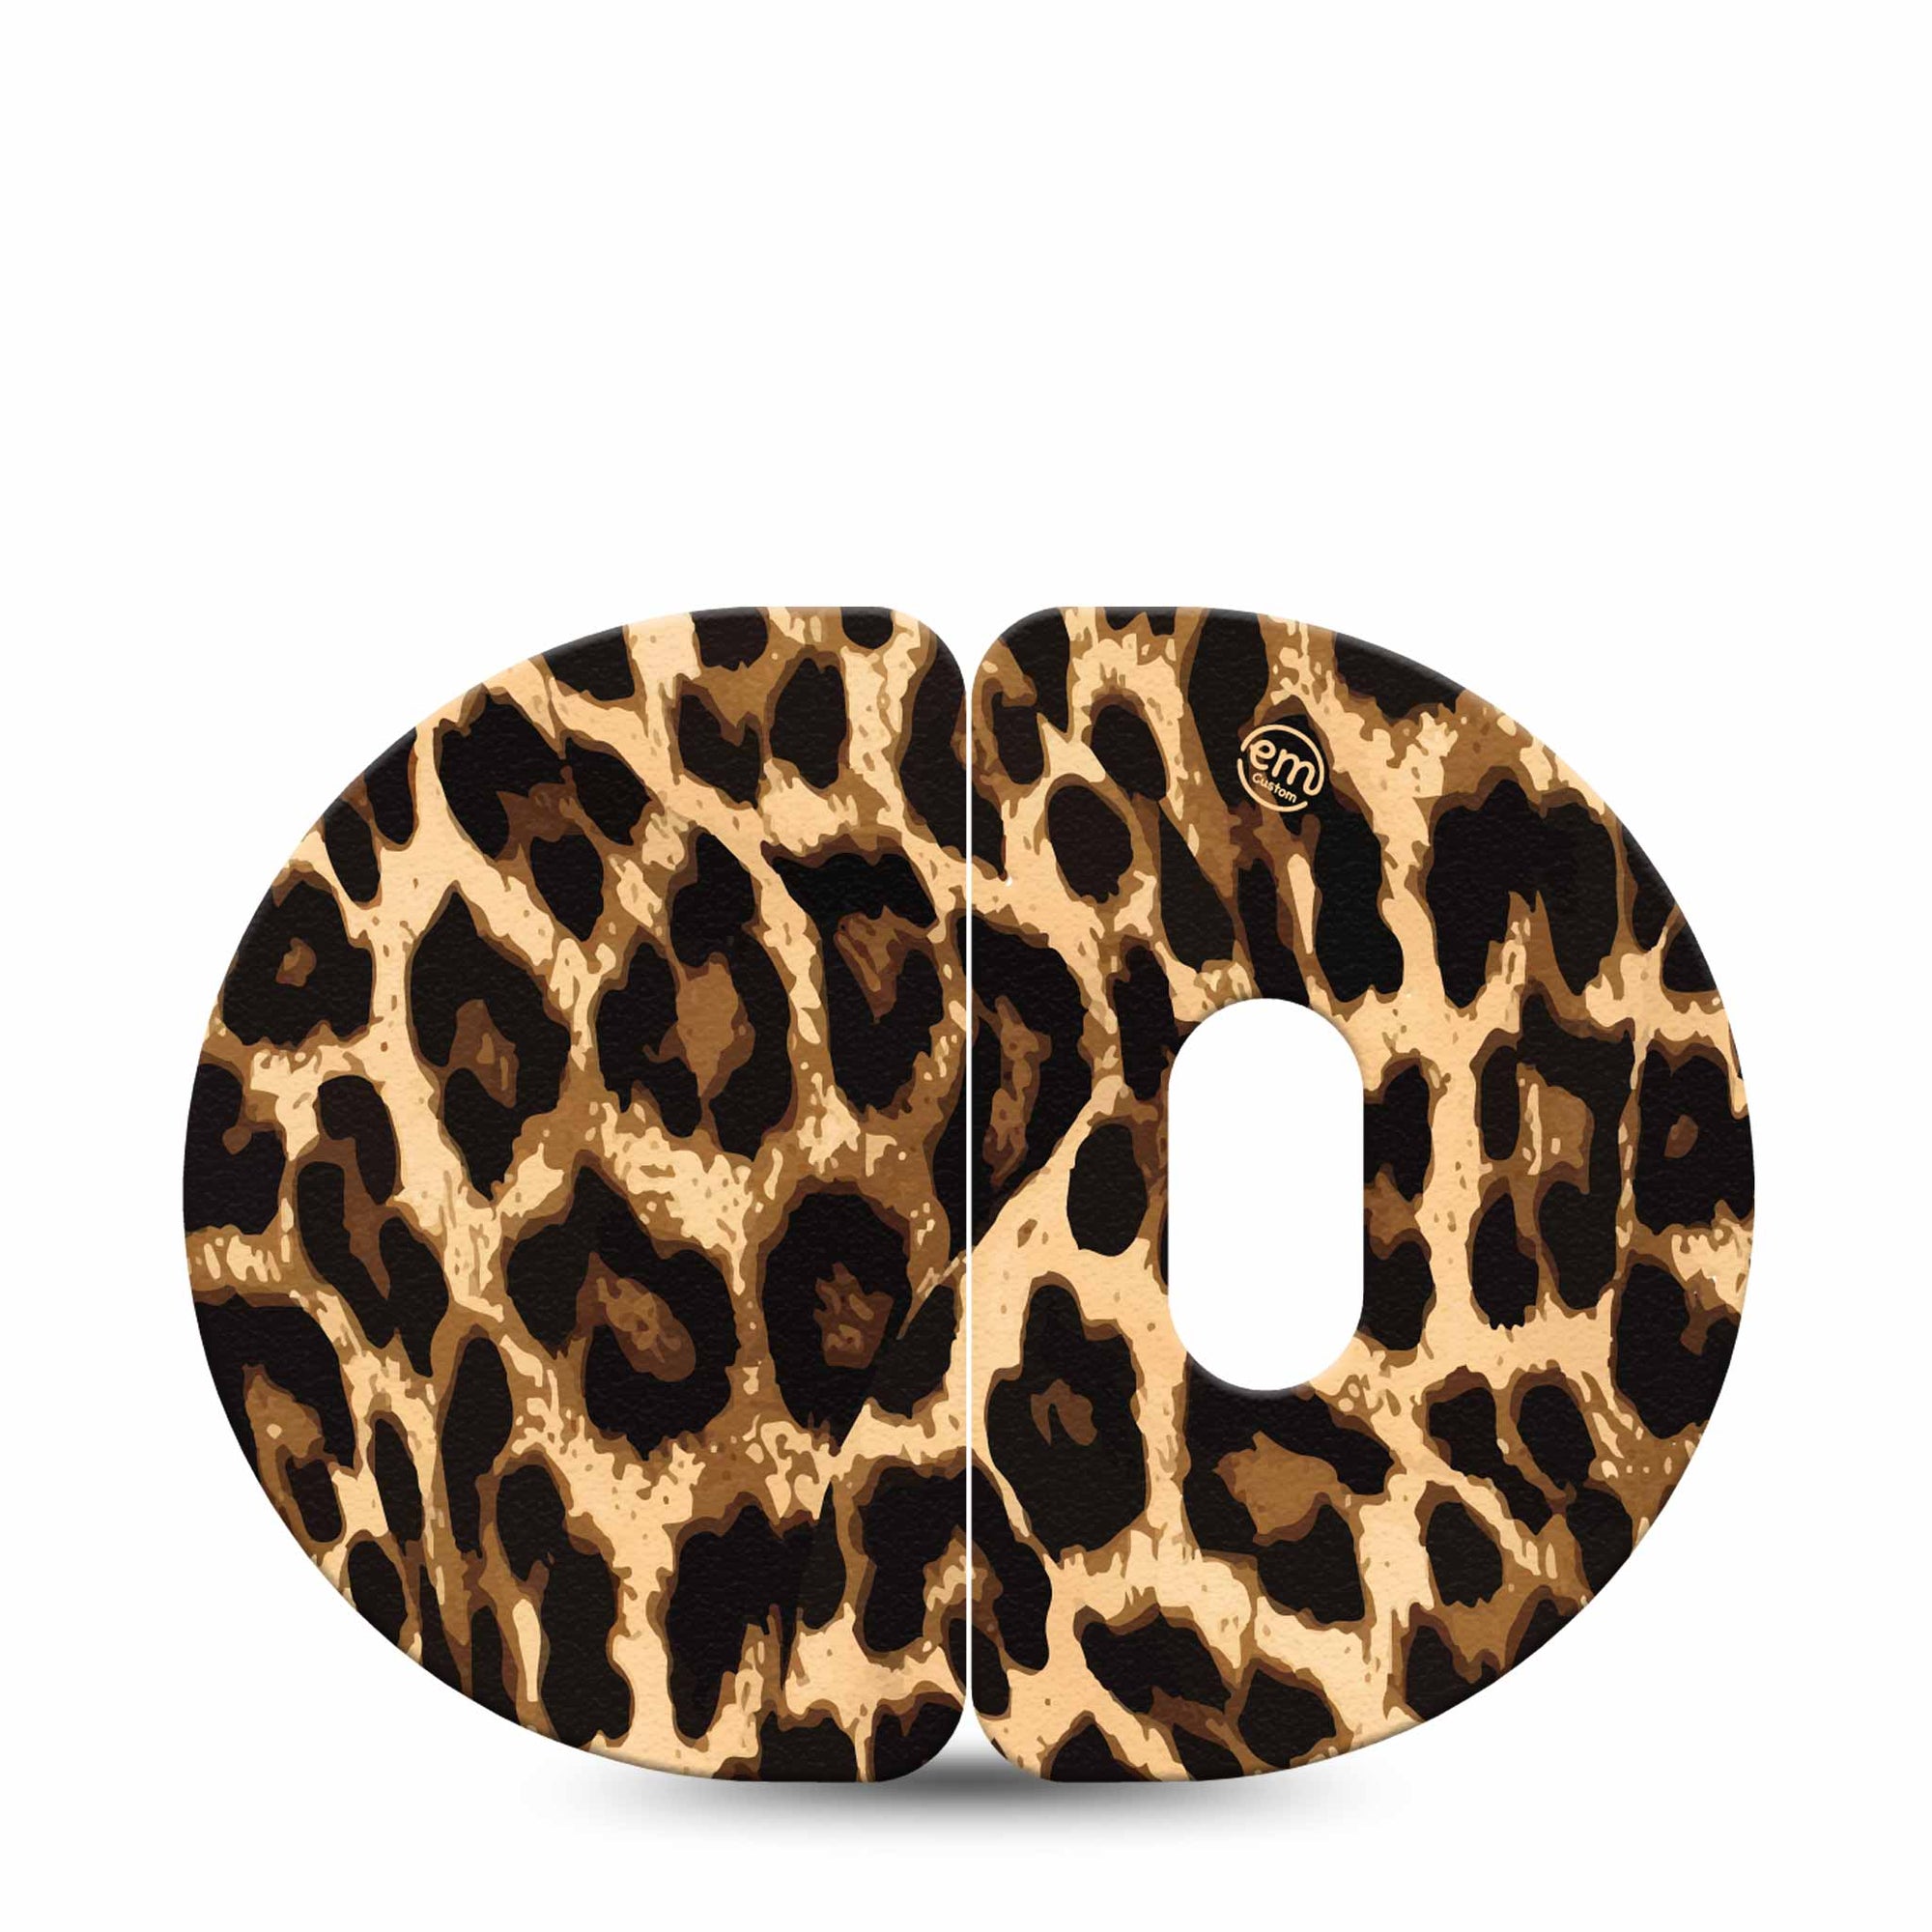 Medtronic Enlite / Guardian ExpressionMed Leopard Print 2-Piece Enlite Medtronic Adhesive Patch, Single Tape, Animal Print Themed CGM Tape